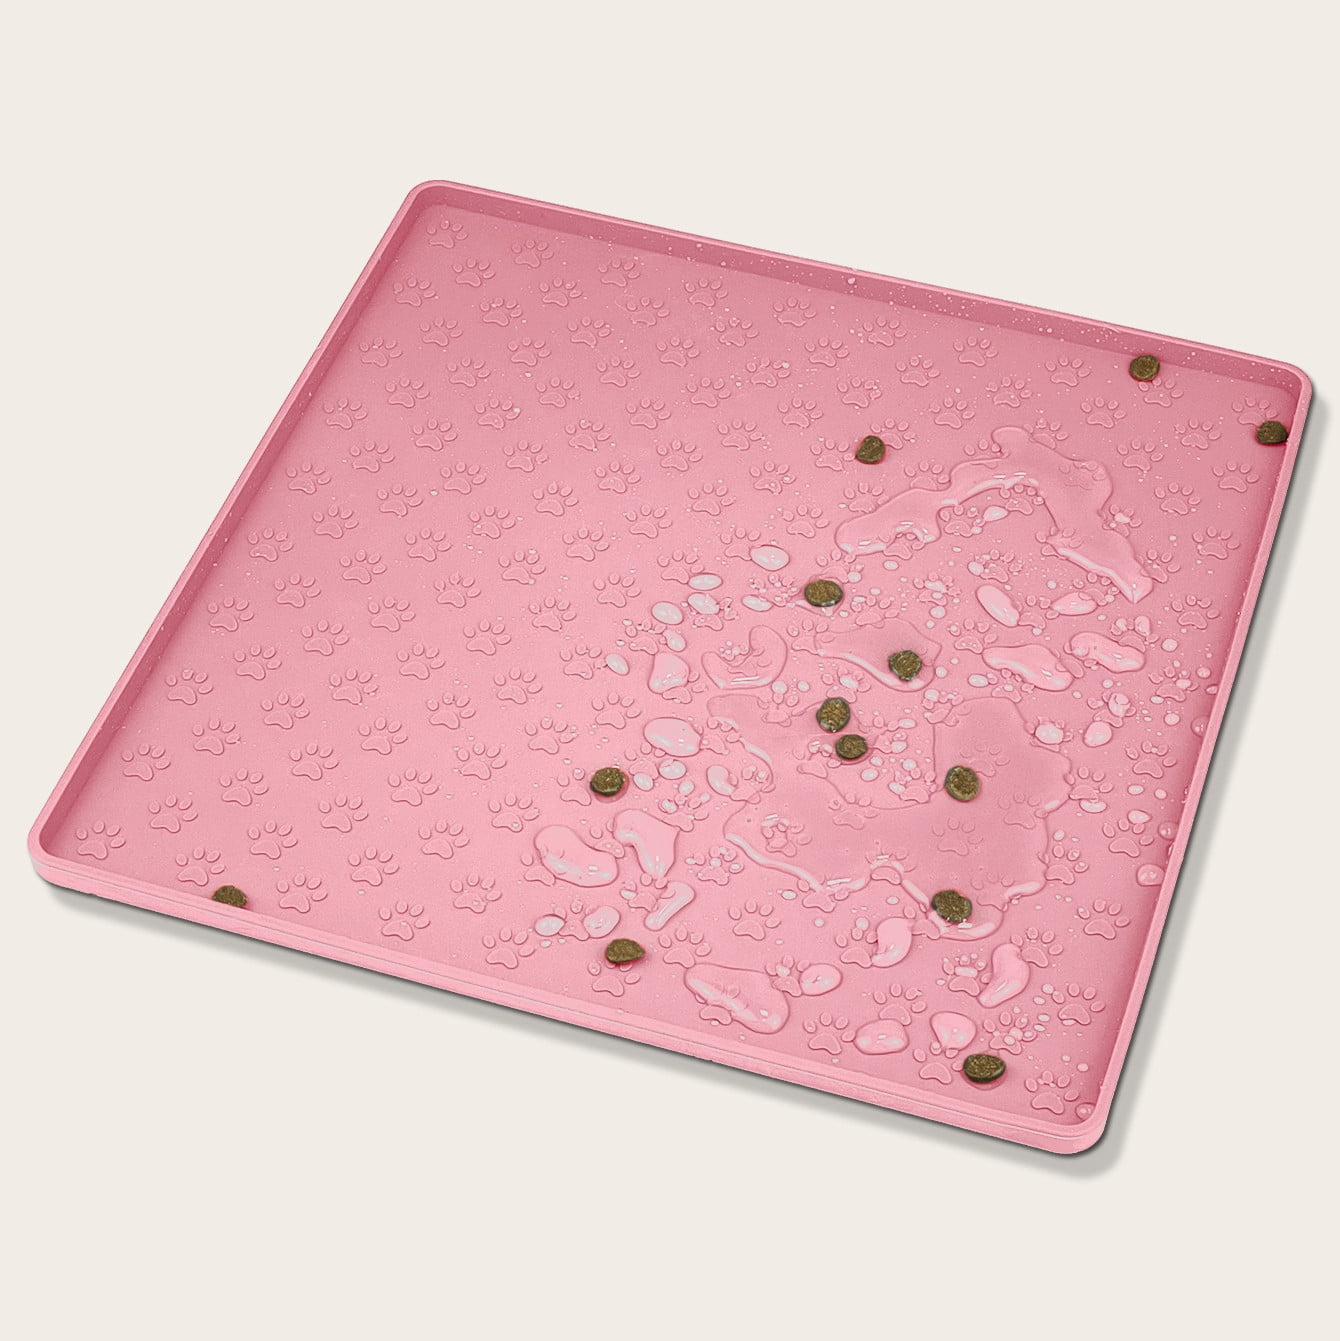  Stiio - Pet Feeding Mat, Rubber Backed Cat Food Mat for Floor  Non-Slip Waterproof Dog Water Bowl Tray, Easy to Clean Pet Placemat, Pink  17x28 inches : Pet Supplies